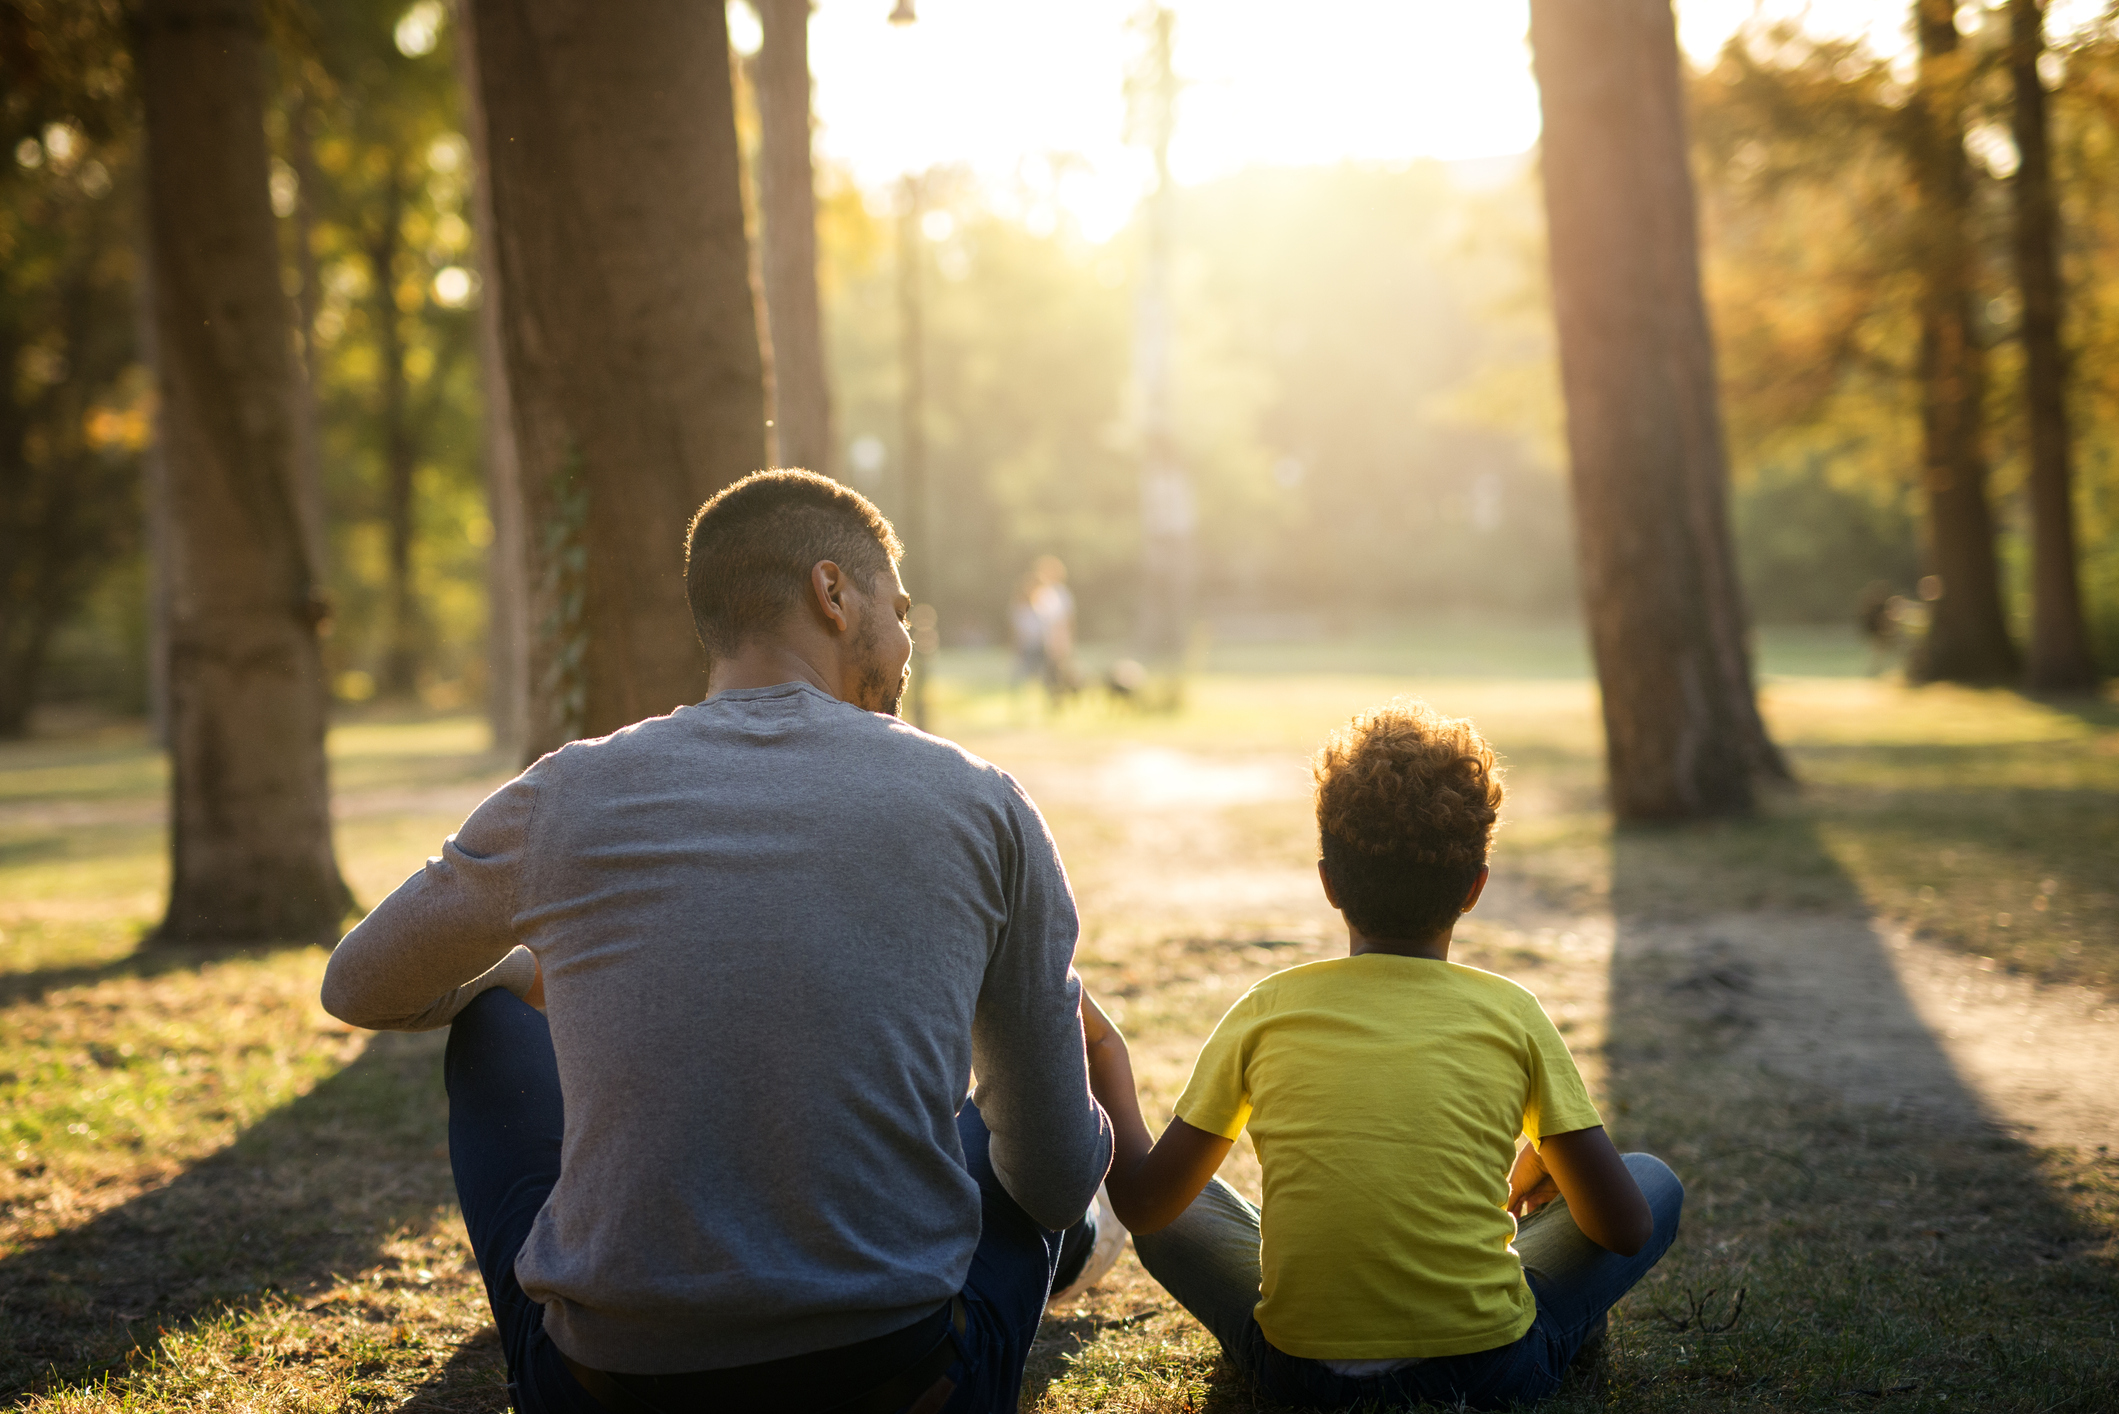 Father and daughter sitting on grass in park enjoying sunset together. People bonding.